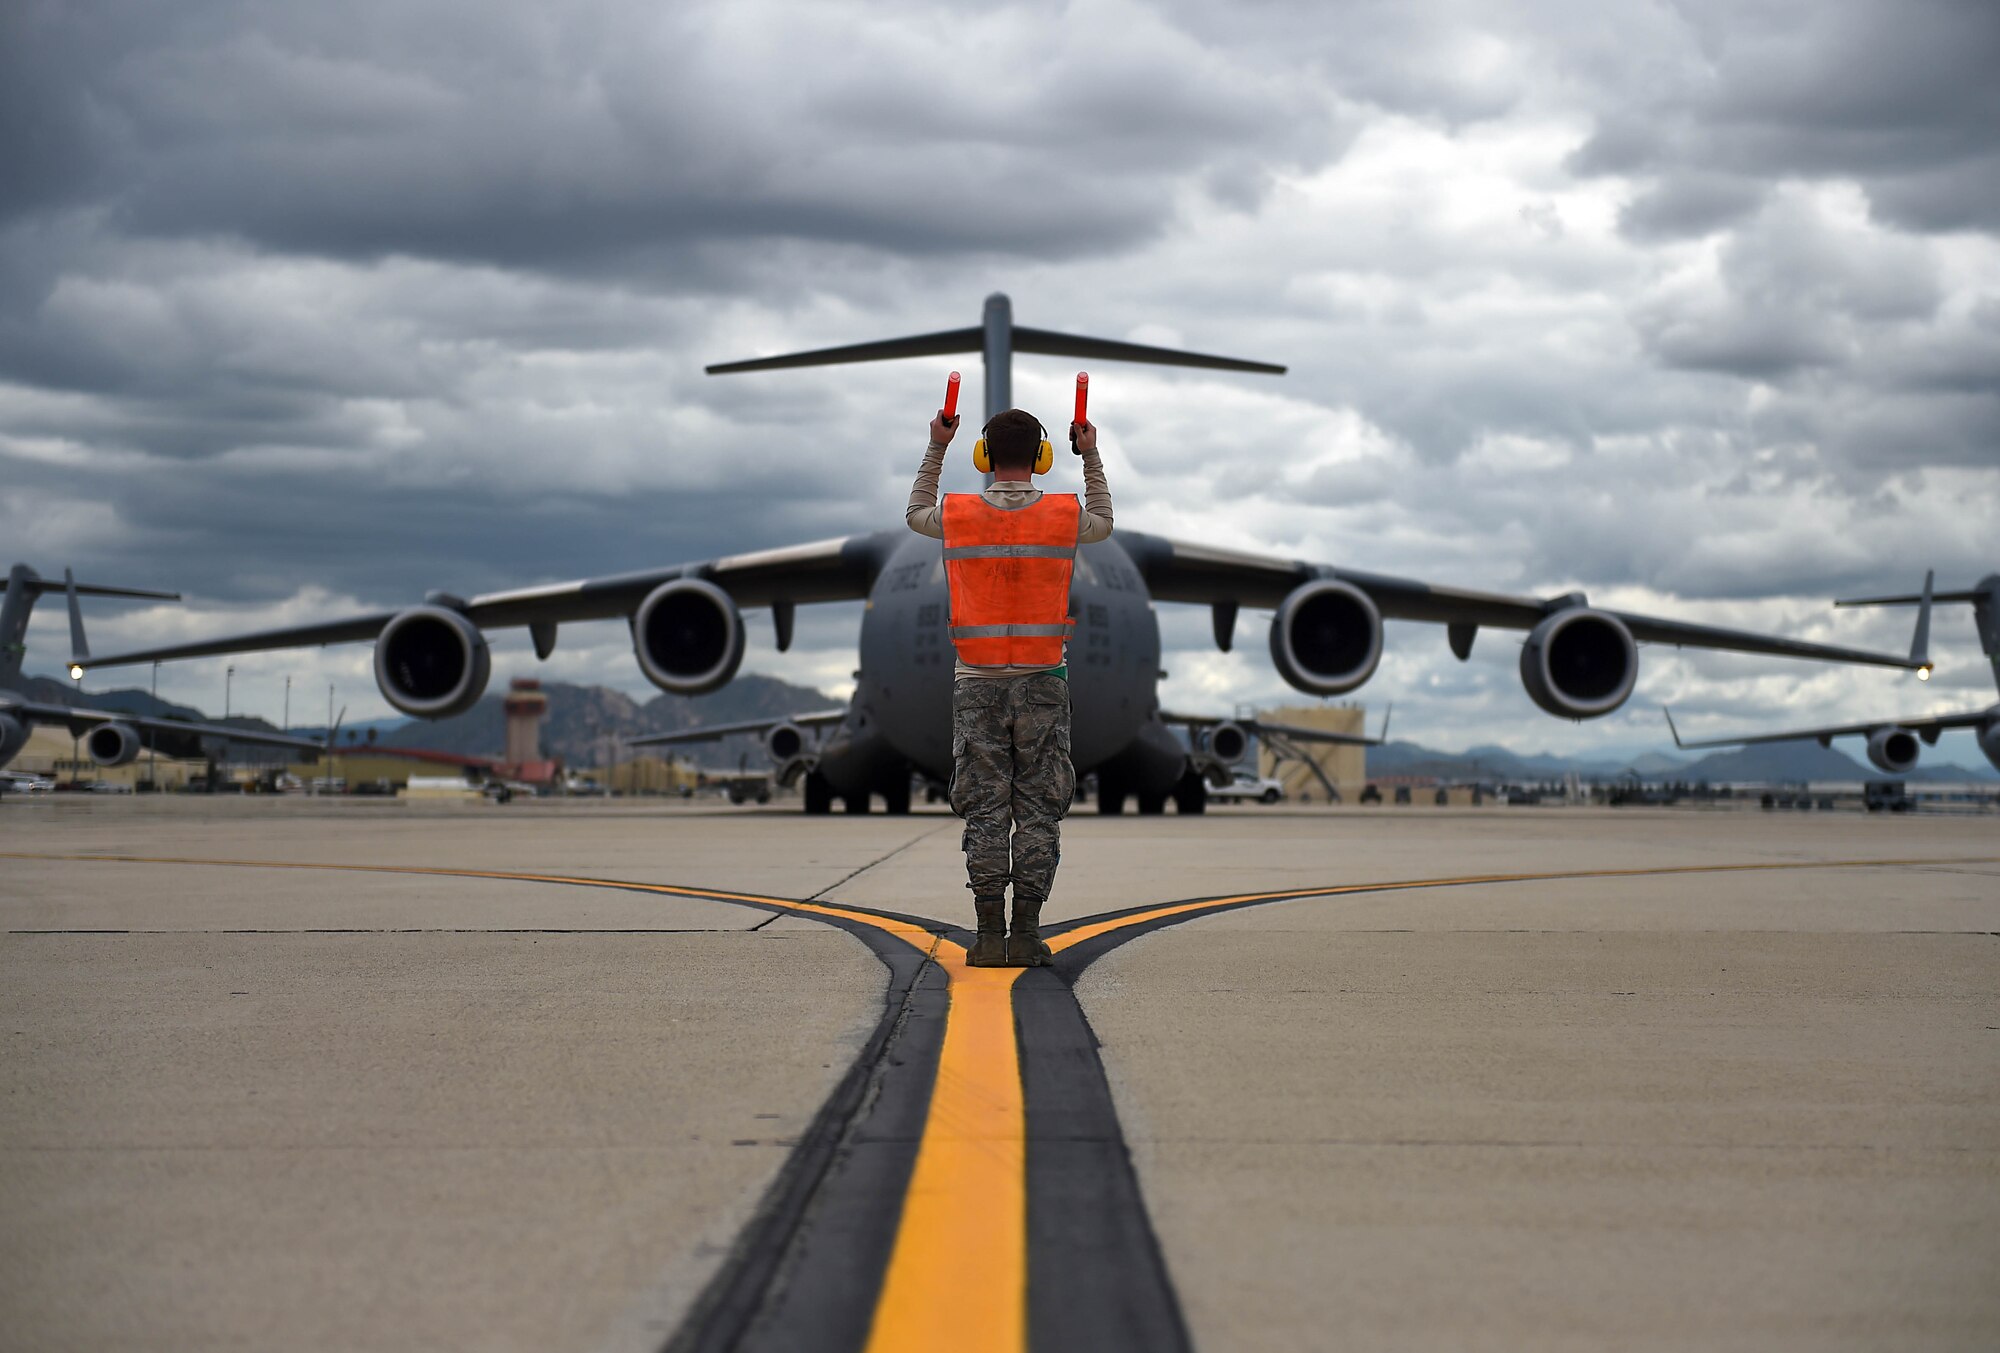 Senior Airman Nathan Cremeans, 62nd Aircraft Maintenance Squadron crew chief, marshals a C-17 Globemaster III as it prepares to take off from March Air Reserve Base in California, April 3, 2019.